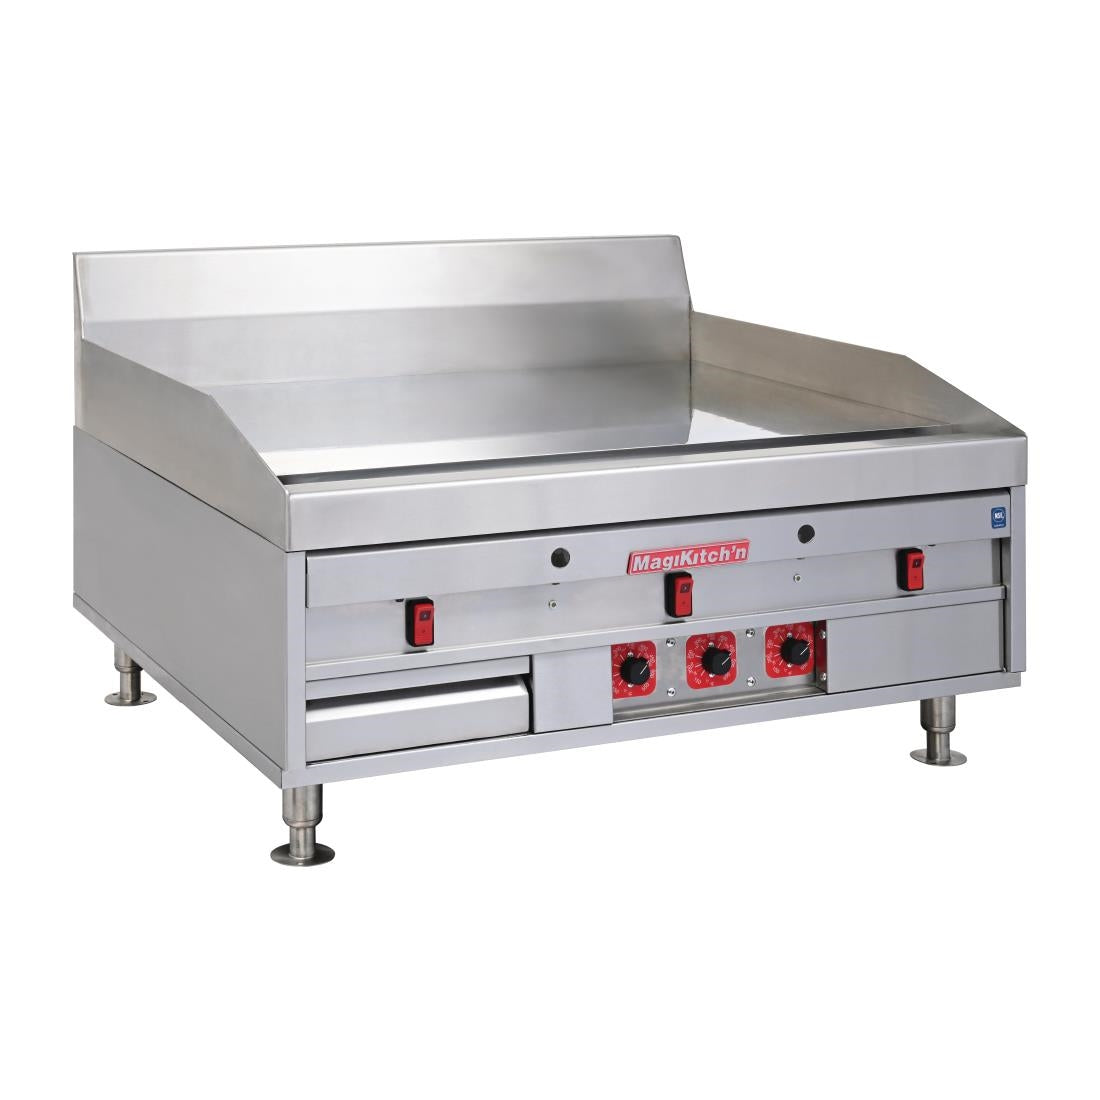 FP885 MagiKitch'n Heavy Duty Chrome Griddle MKE36 JD Catering Equipment Solutions Ltd